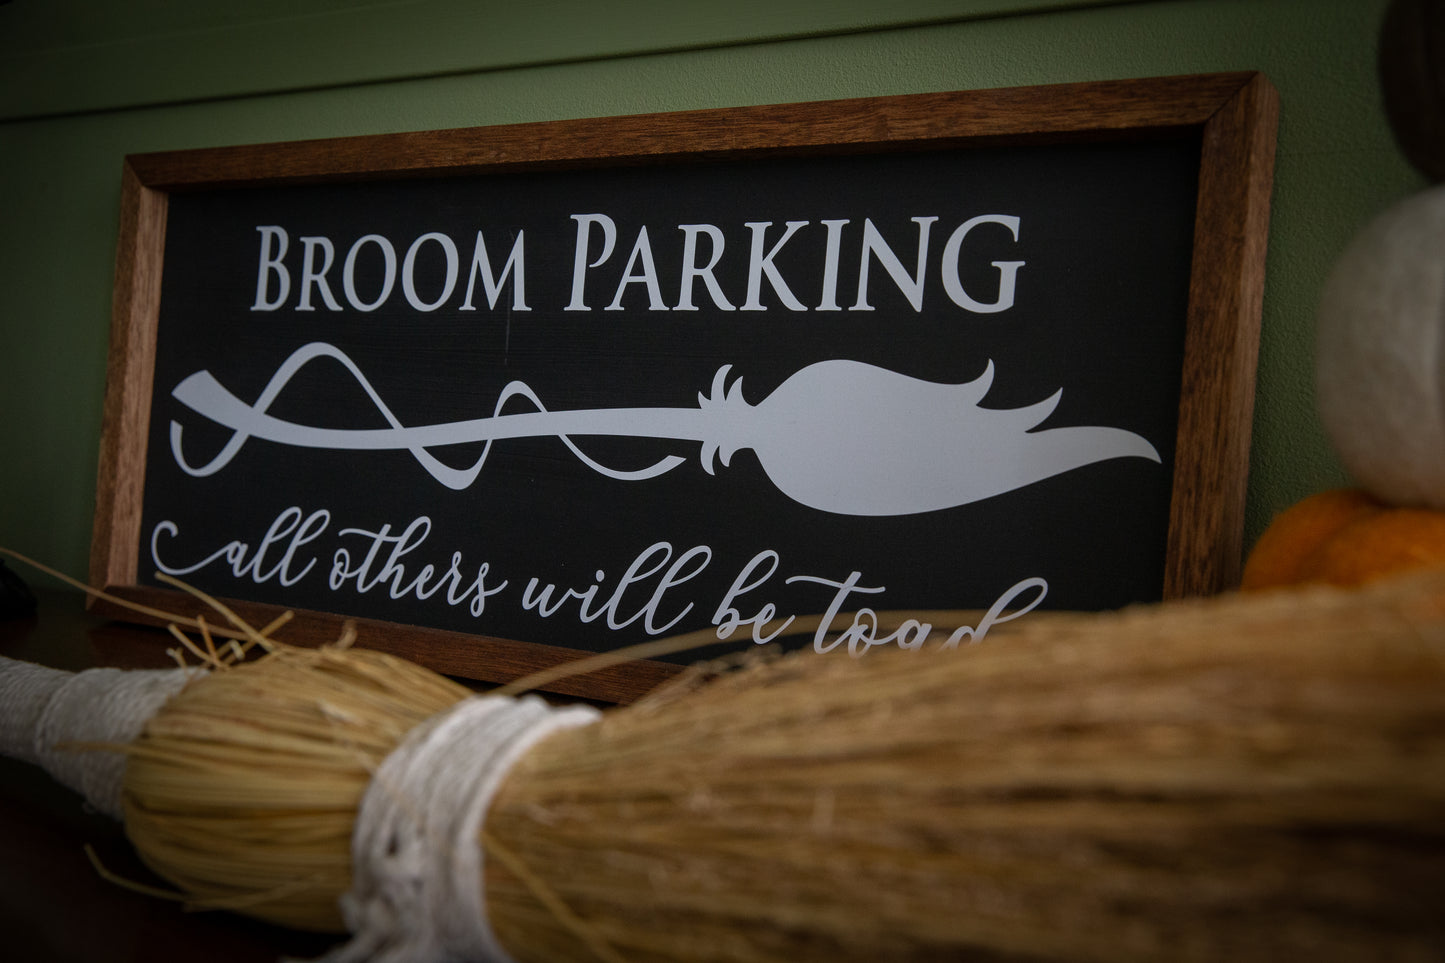 Broom Parking - all others will be toad